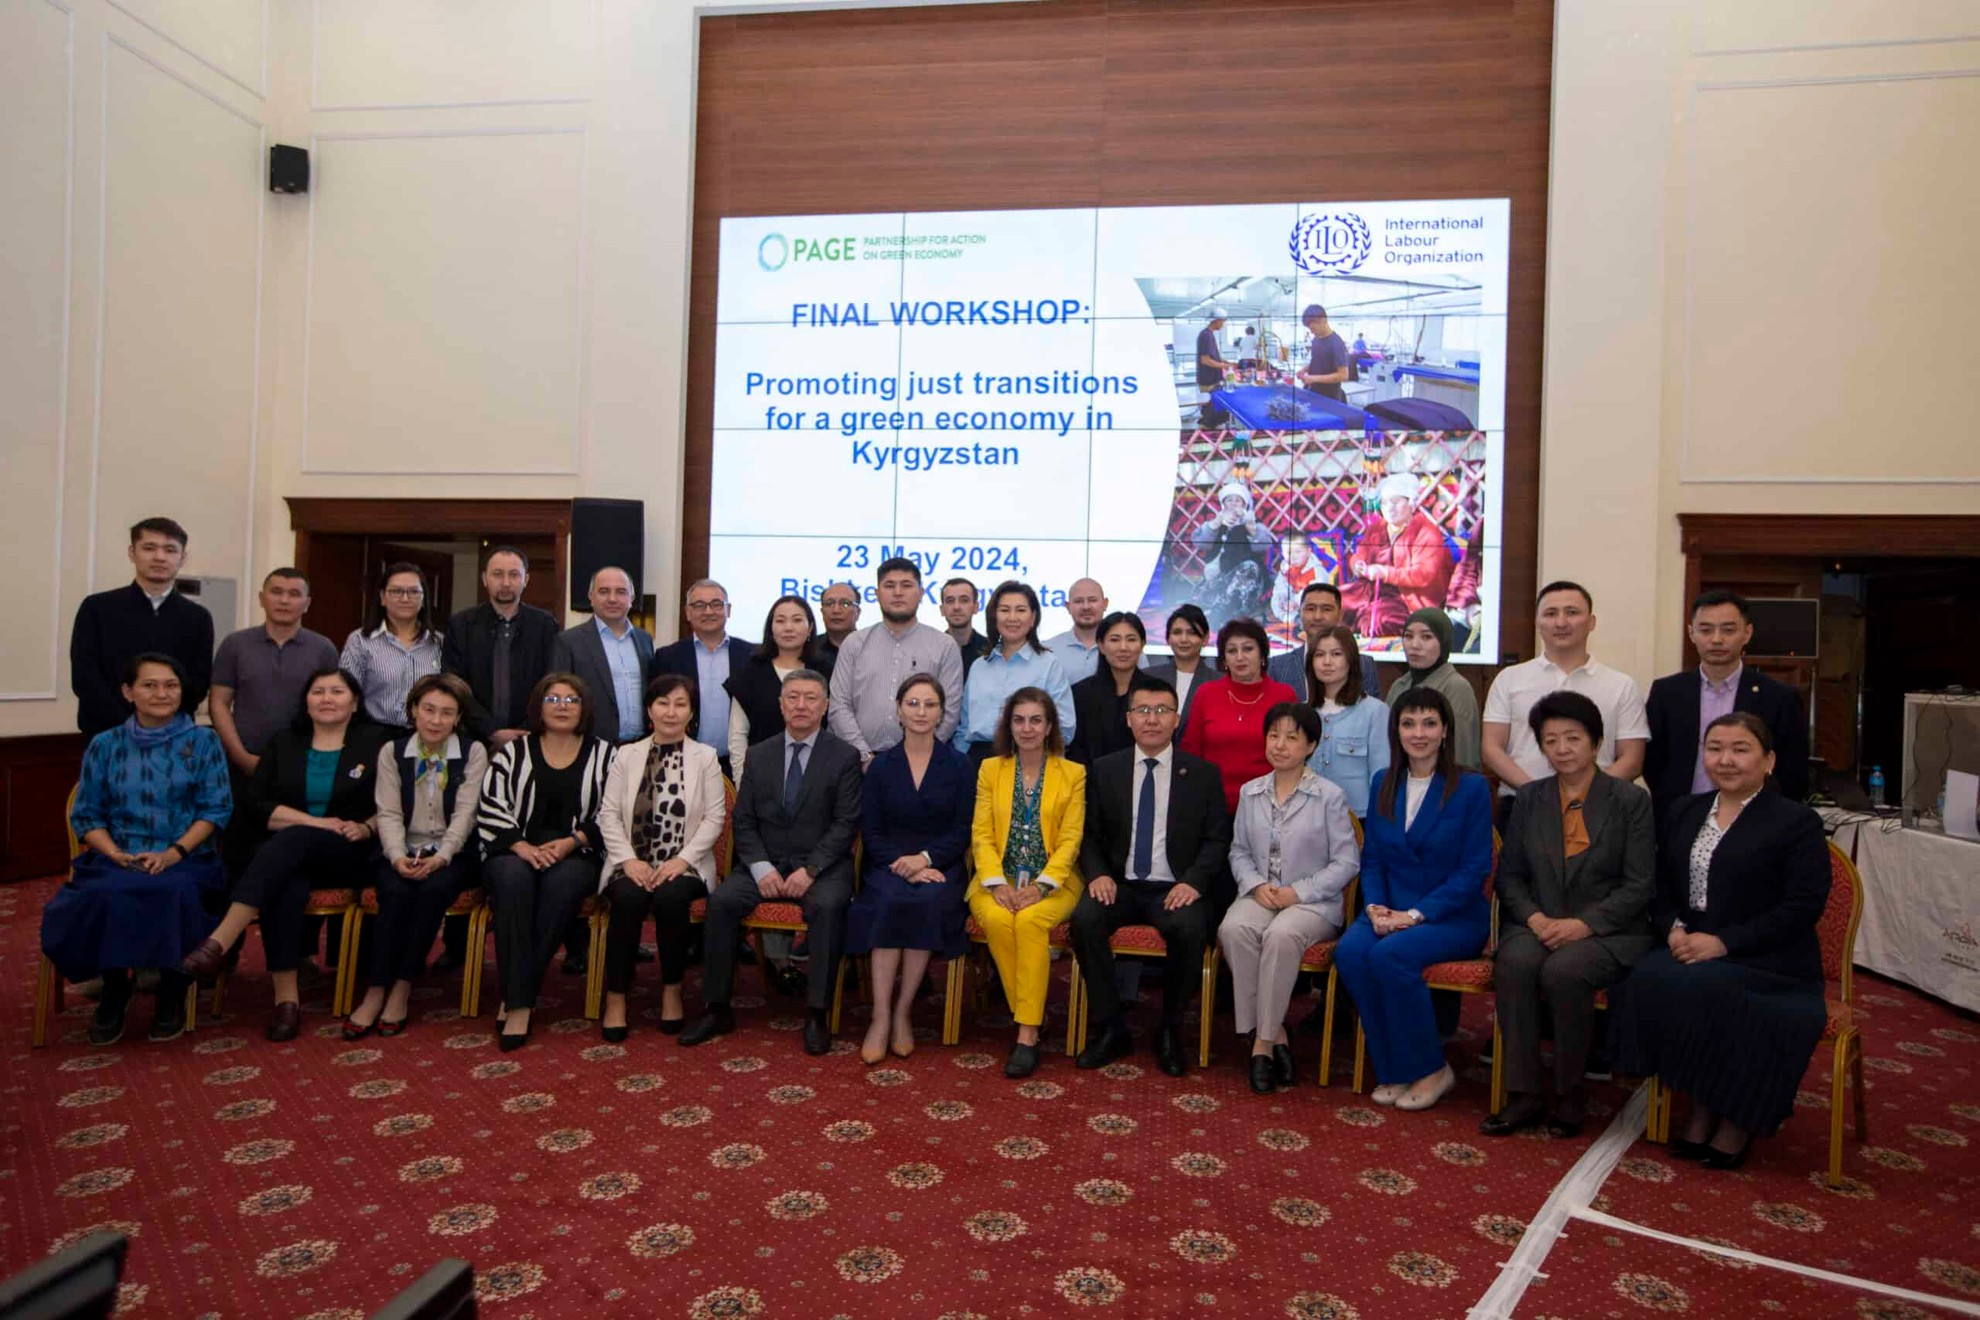 A group of people posing for a photo at the ILO Workshop on promoting just transitions for a green economy in Kyrgyzstan.